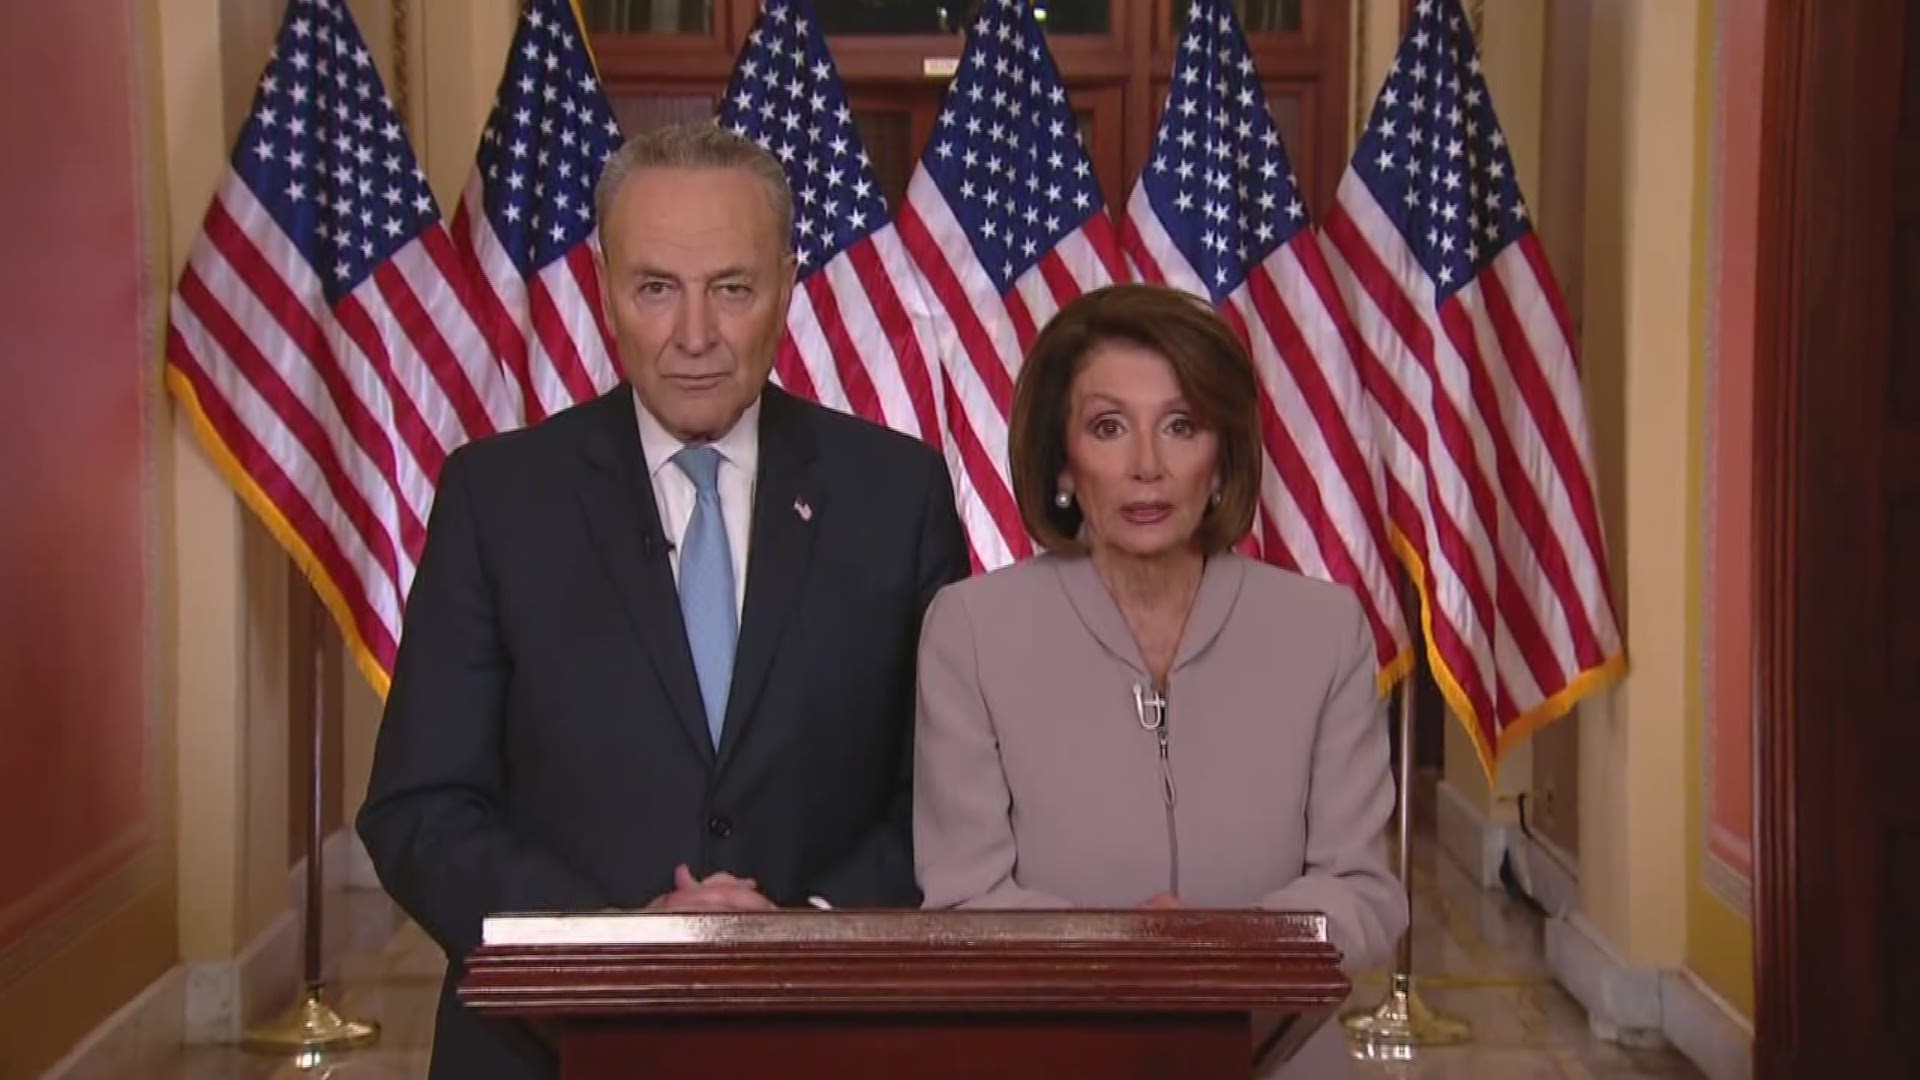 House Speaker Nancy Pelosi and Senate Minority Leader Chuck Schumer gave the Democratic response to President Trump's remarks to the nation Tuesday on his proposed wall on the U.S.-Mexico border.